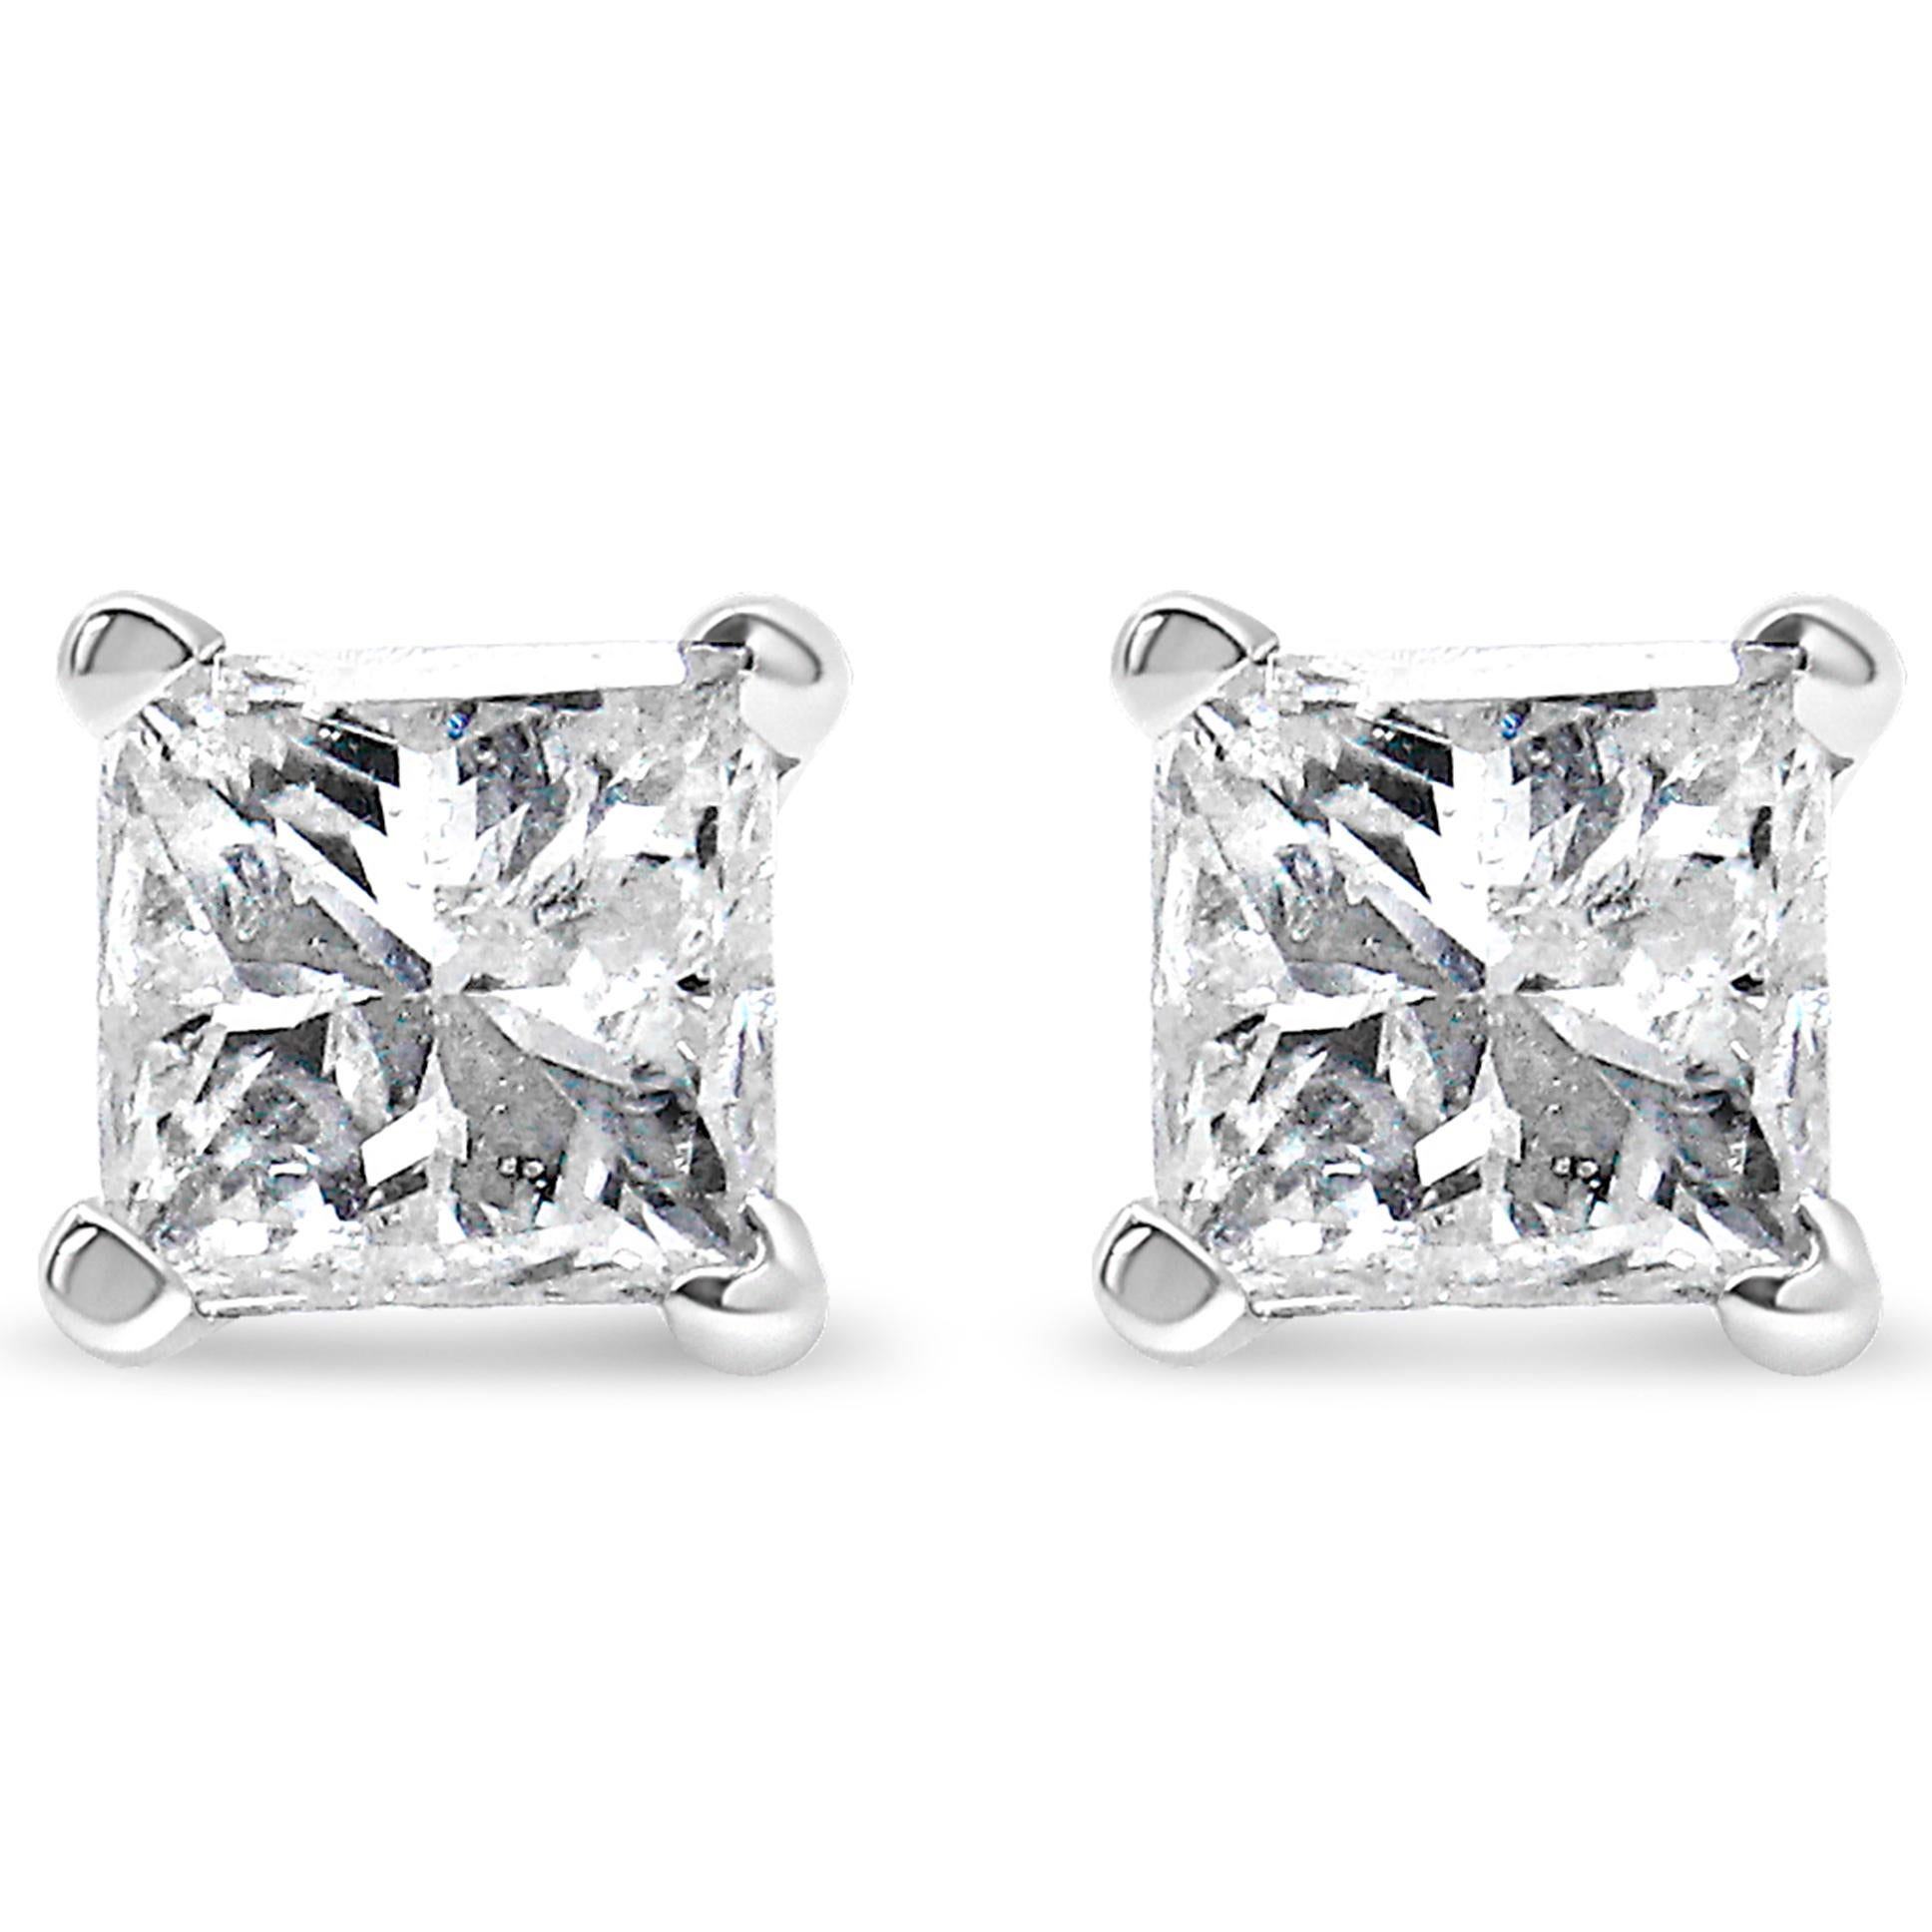 Elegant and timeless, these gorgeous AGS certified 14 karat white or yellow gold solitaire stud earrings feature square, princess cut diamonds in classic 4-prong settings. The earrings feature double notched friction posts with secure butterfly back